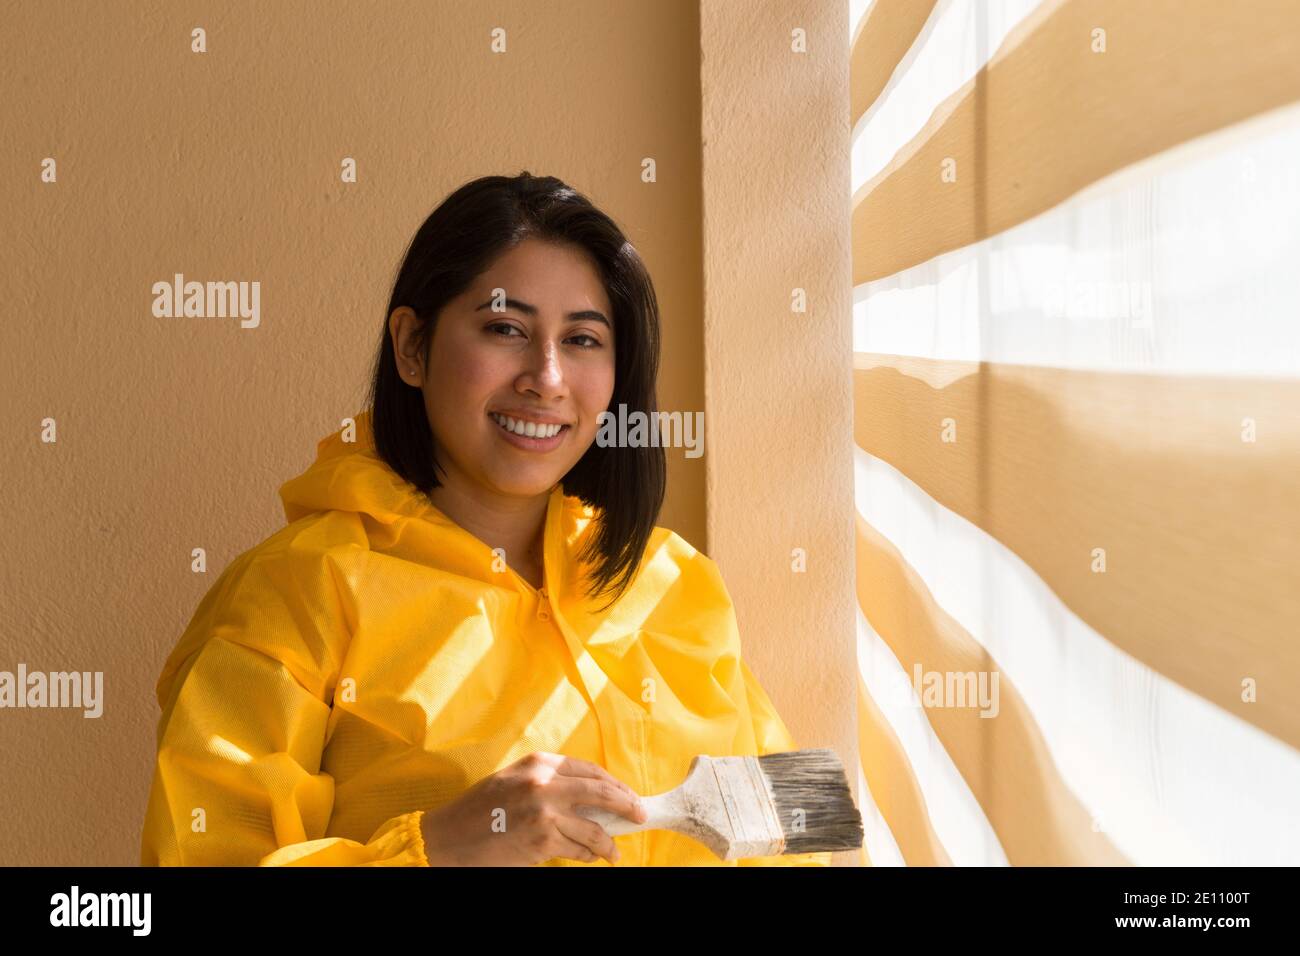 summer, day, paint, wall, face, portrait, short, hair, black, yellow, impermeable, job, work, happy, new, department, house, home, young, girl, woman, Stock Photo